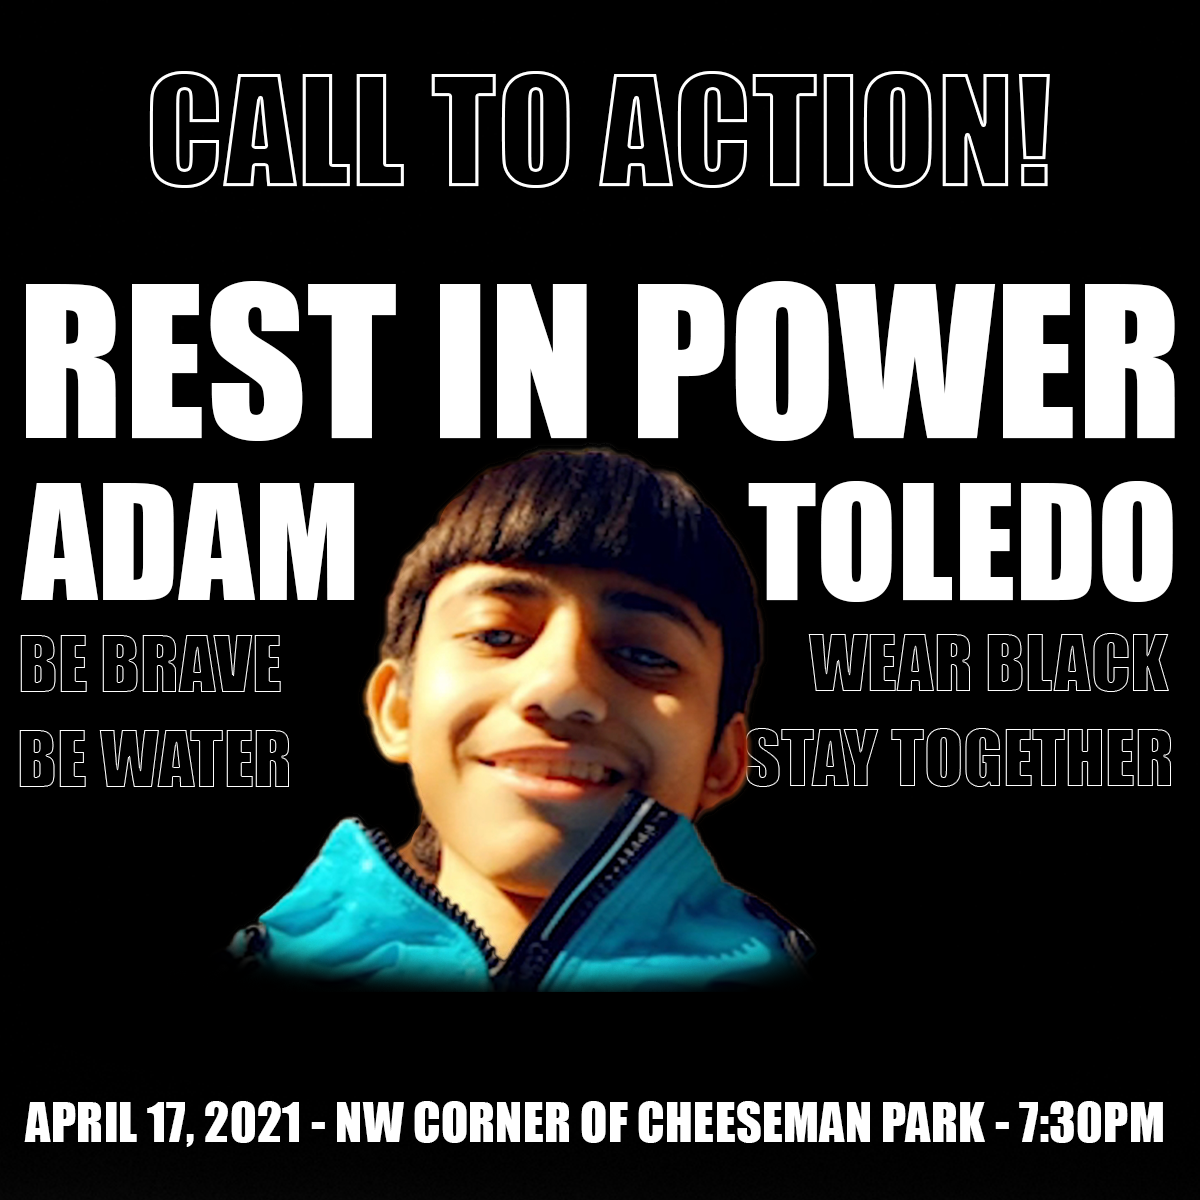 A flyer with Adam Toledo's face on it reading: Call To Action! Rest in Power Adam Toledo. Be Brave, Be Water, Wear Black, Stay Together